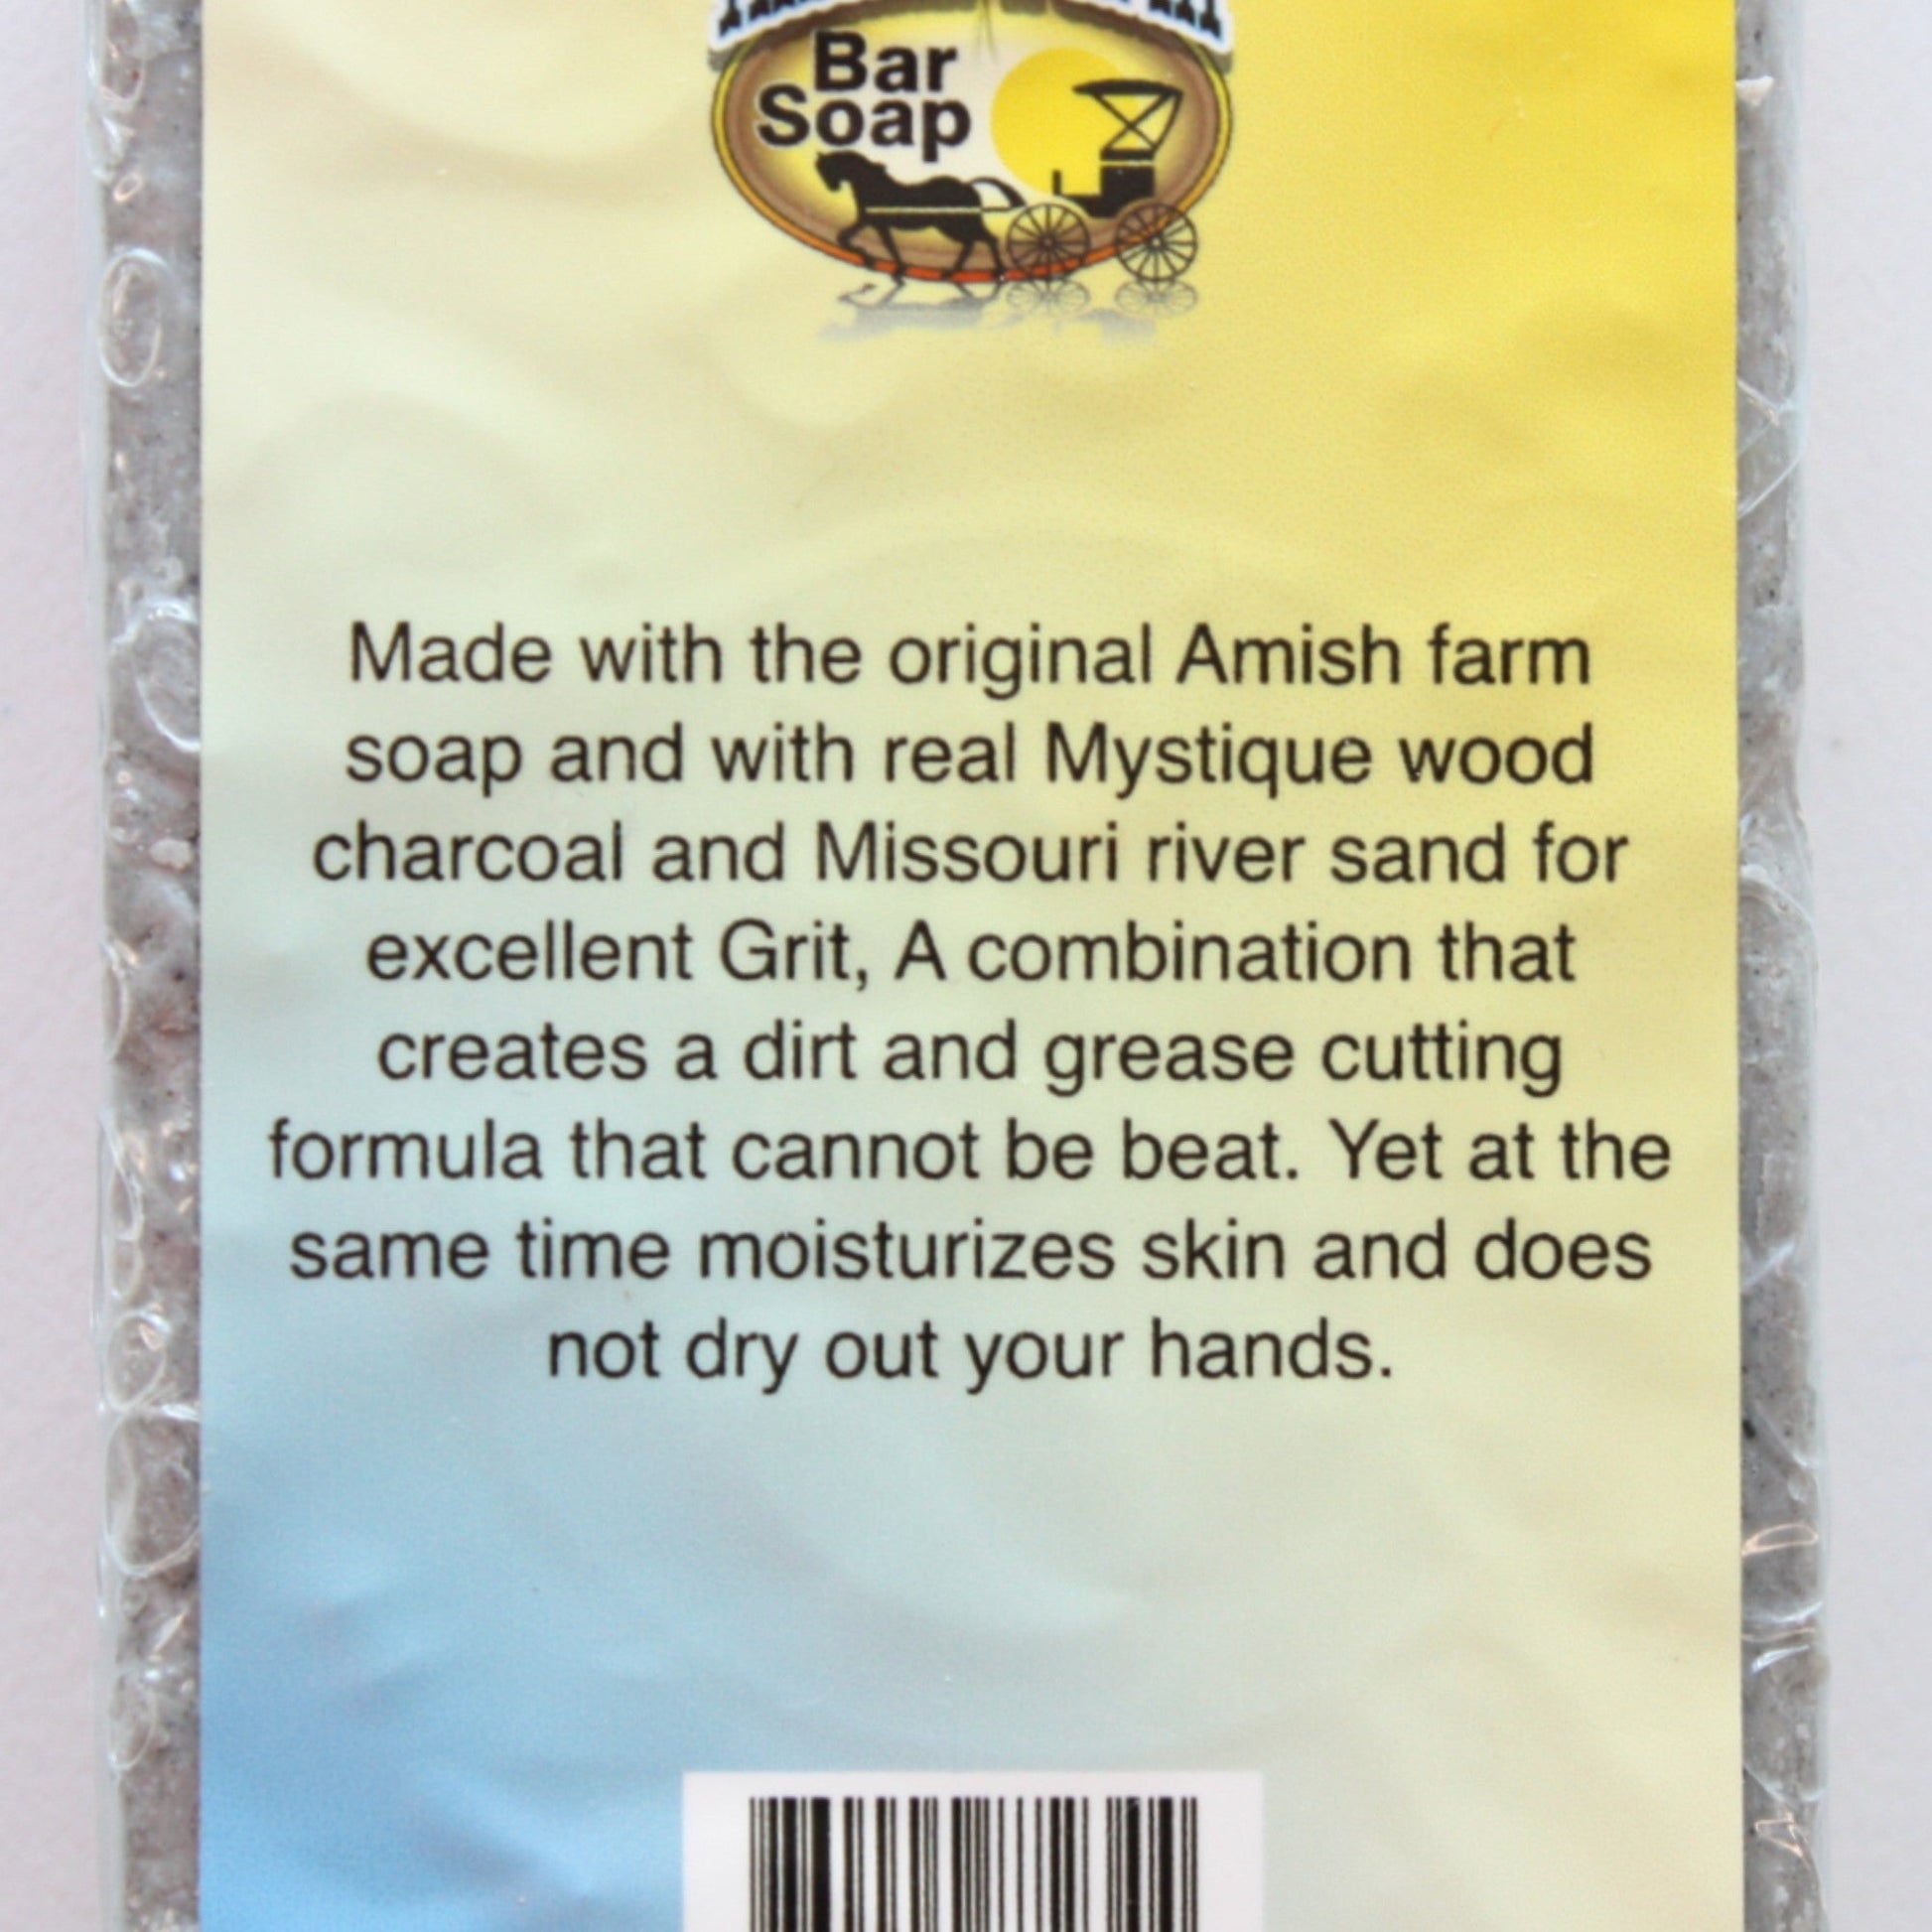 Amish Farms Soap 5 Bar Bag - Proudly Handmade in the USA - , LLC